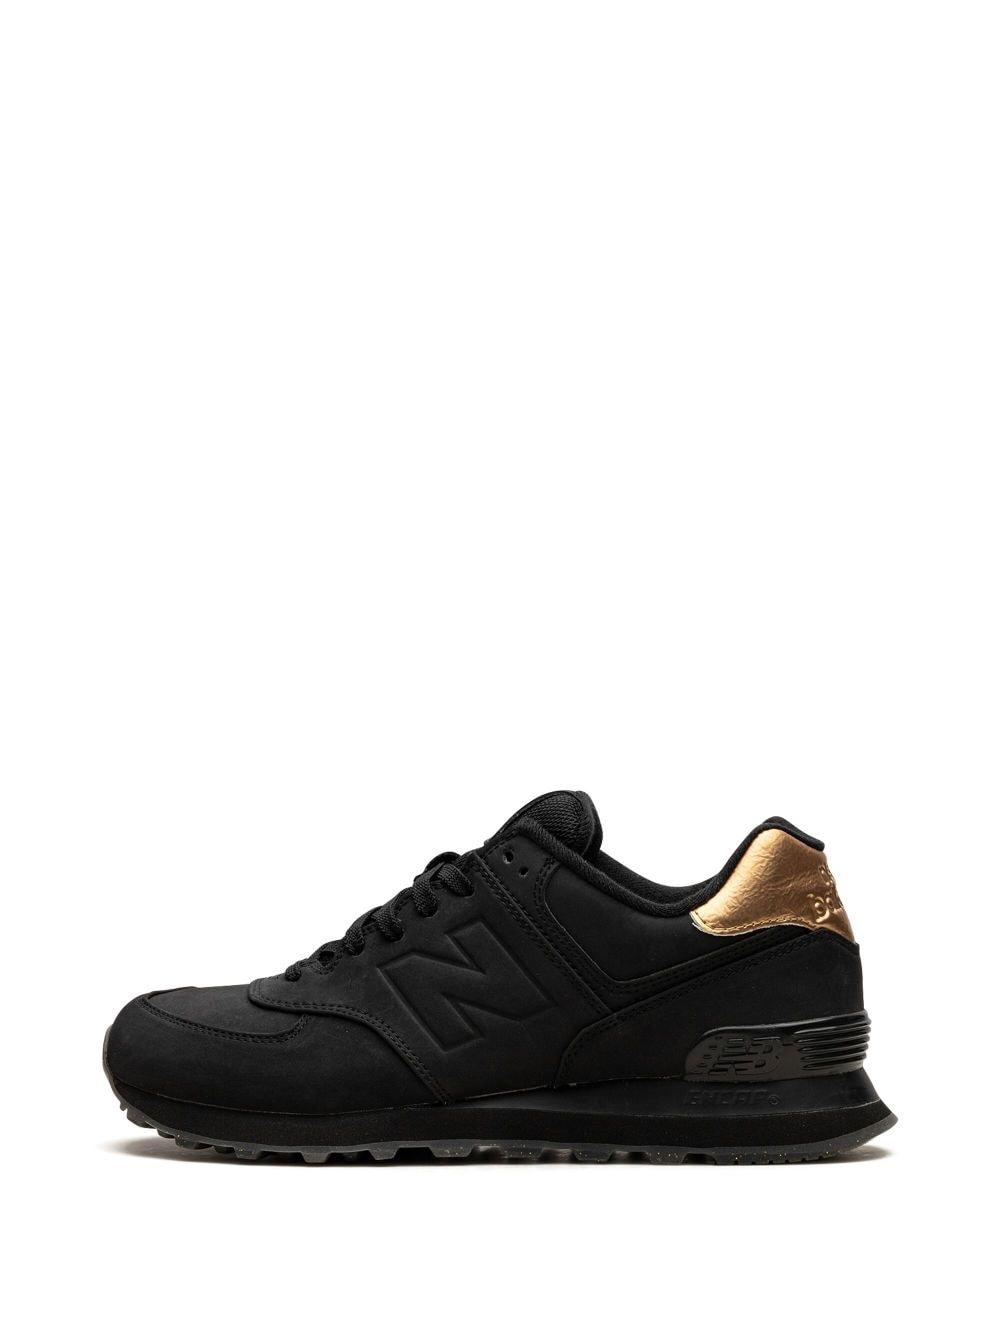 New Balance 574 "black/gold" Sneakers | Lyst